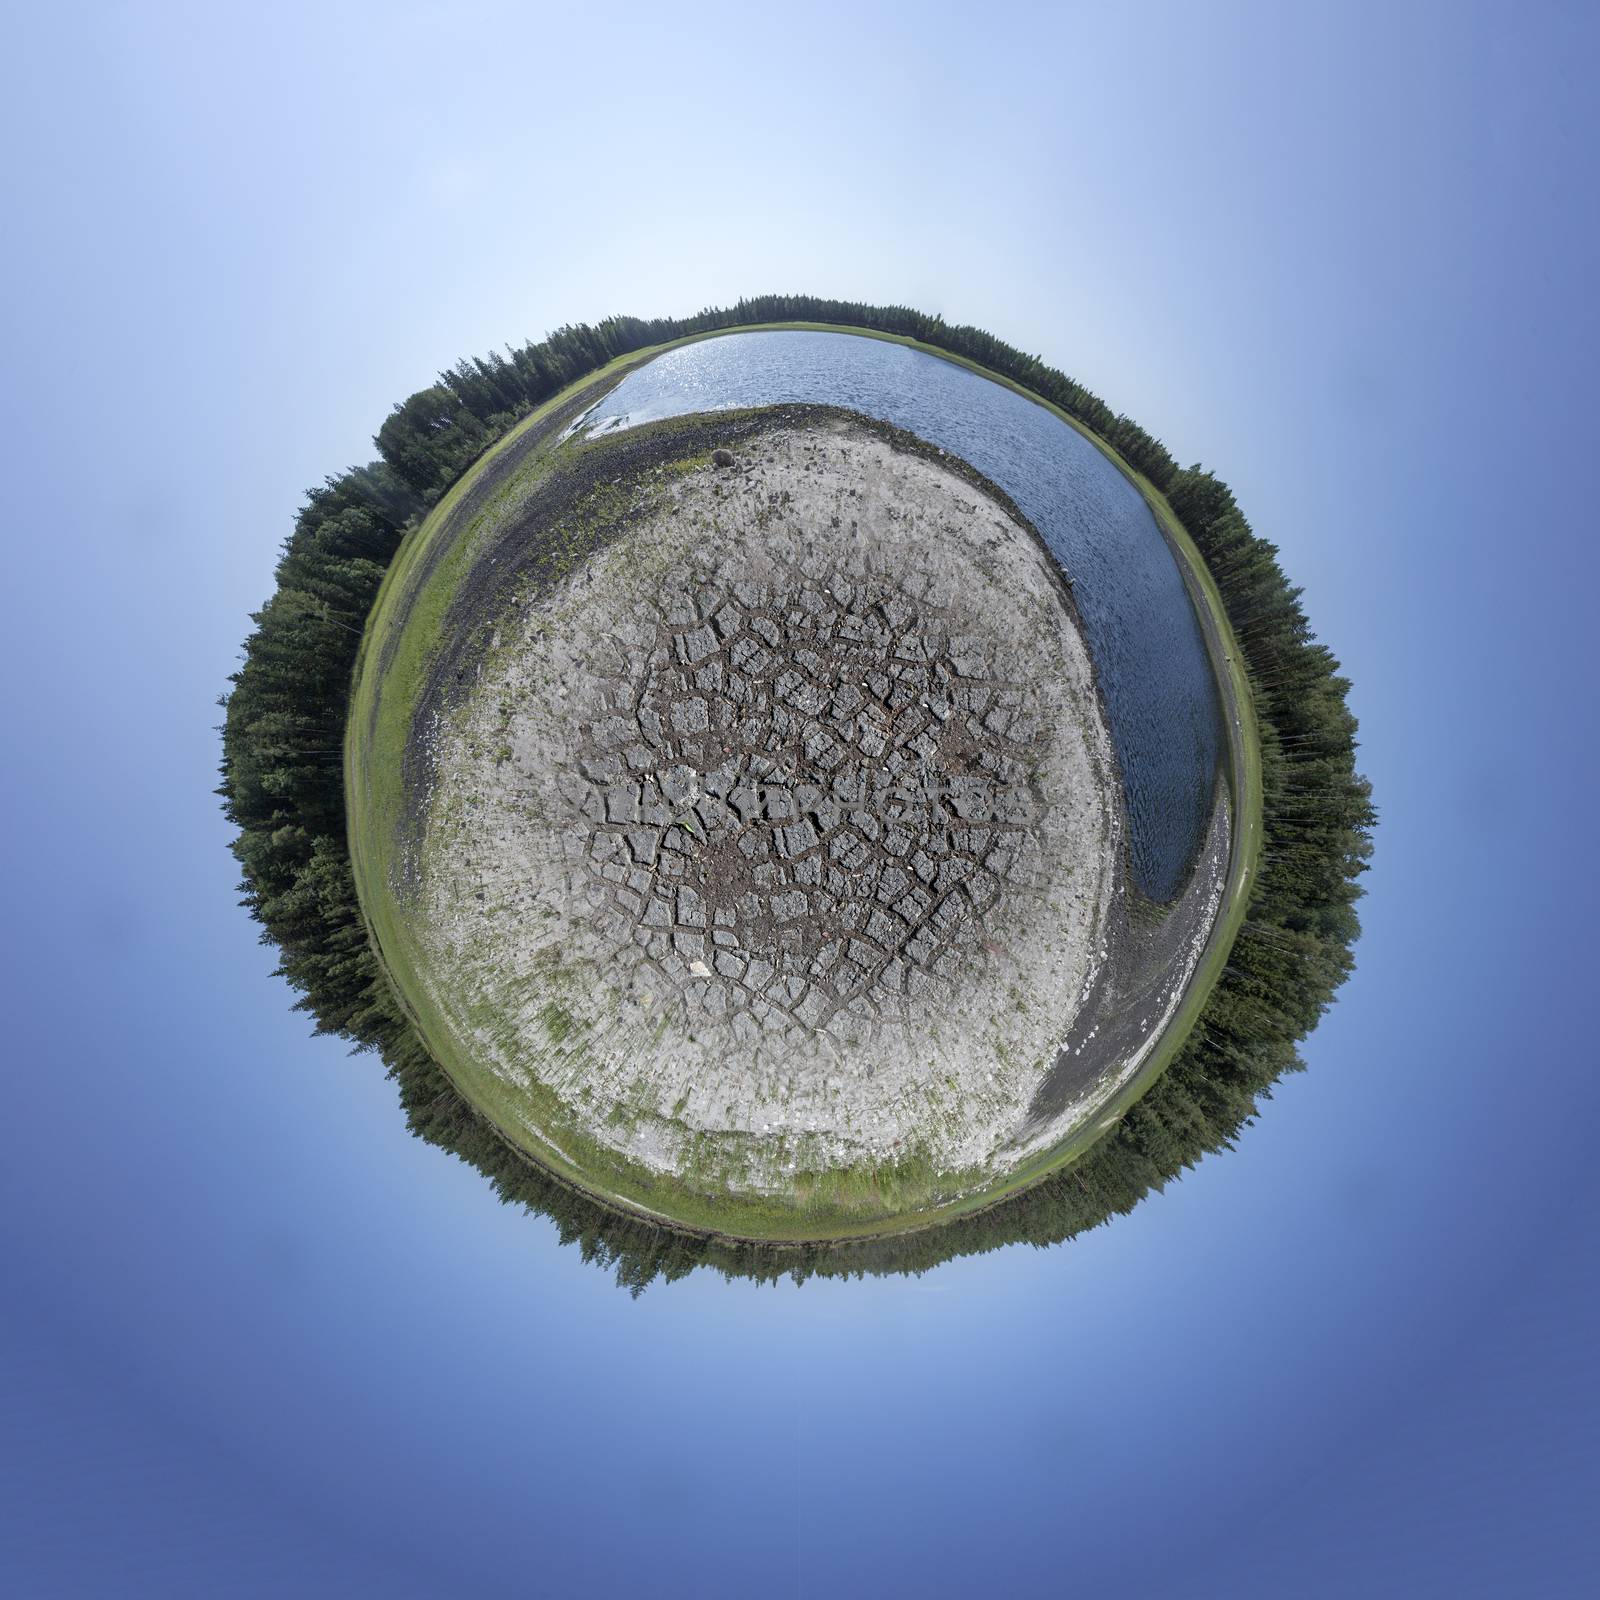 Dried Out Lake bed as Tiny Planet